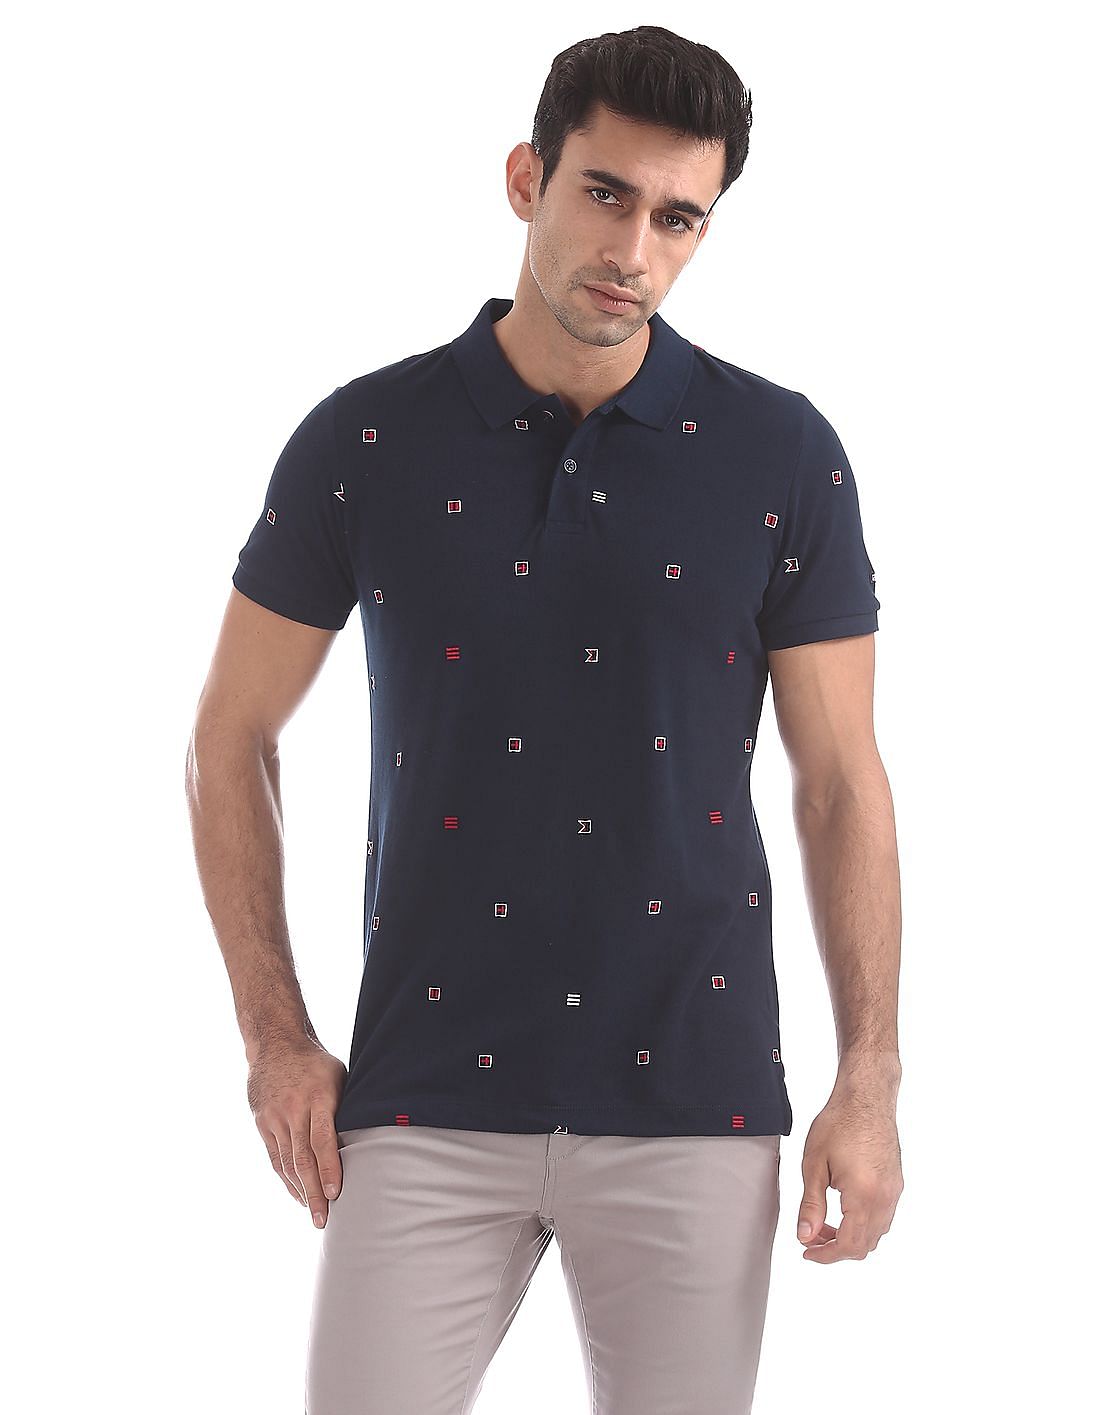 Buy Arrow Sports Regular Fit Embroidered Polo Shirt - NNNOW.com